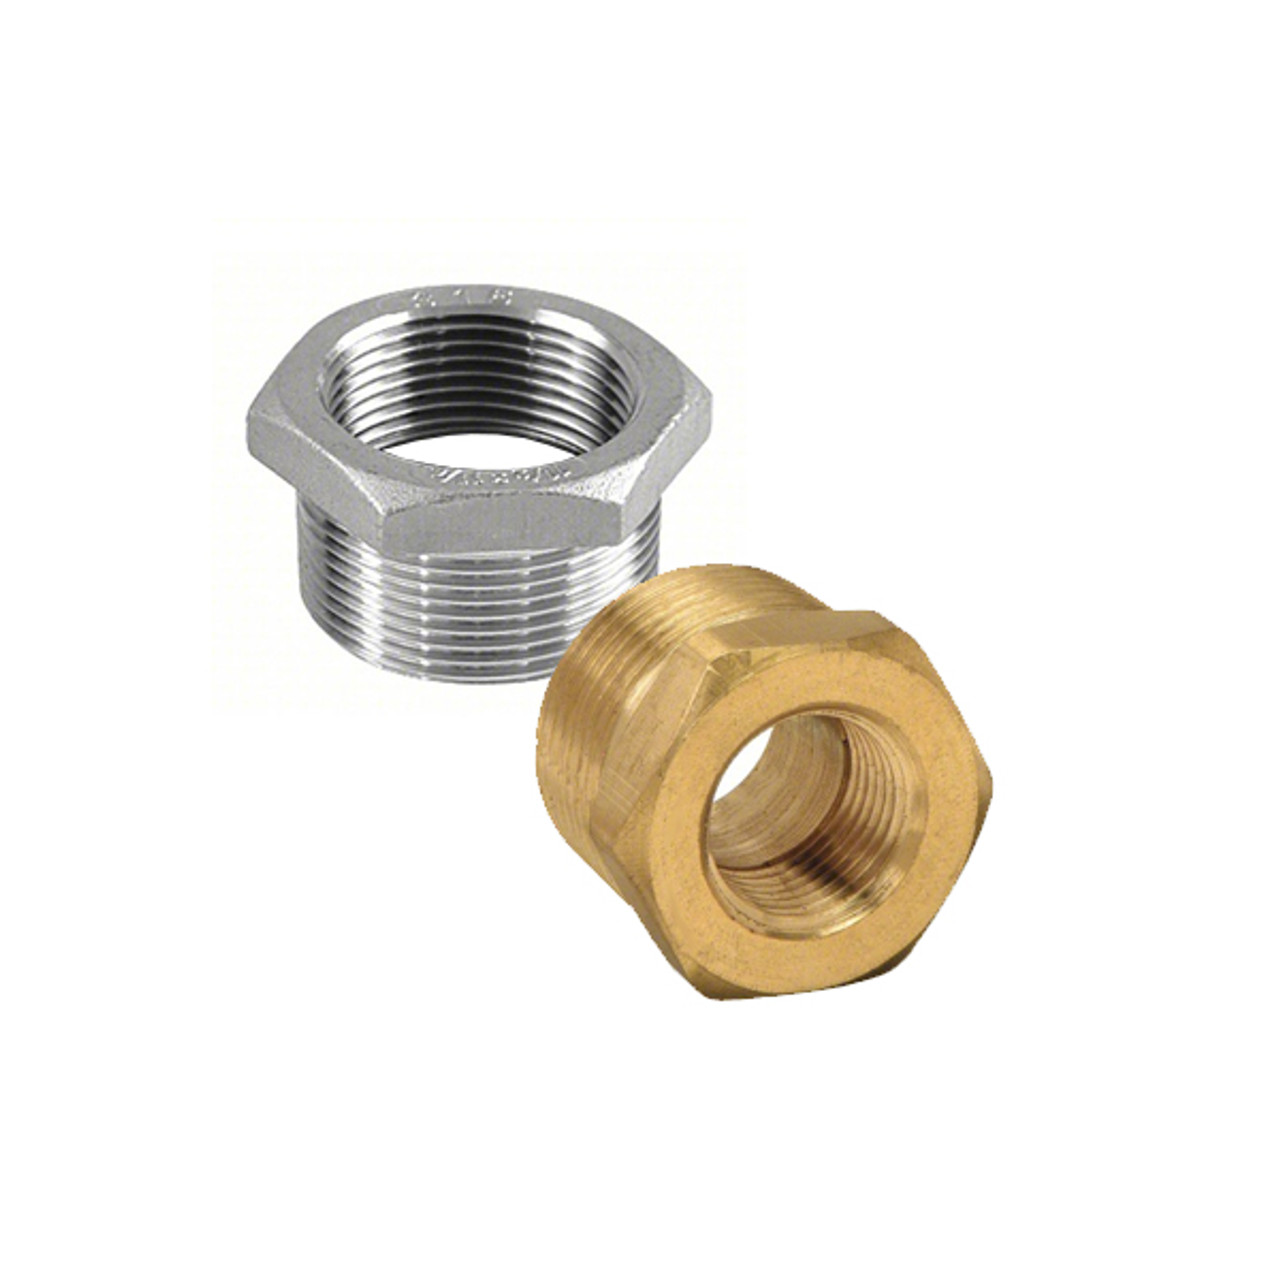 Reducer Bushing, Male X Female Pipe Adapters